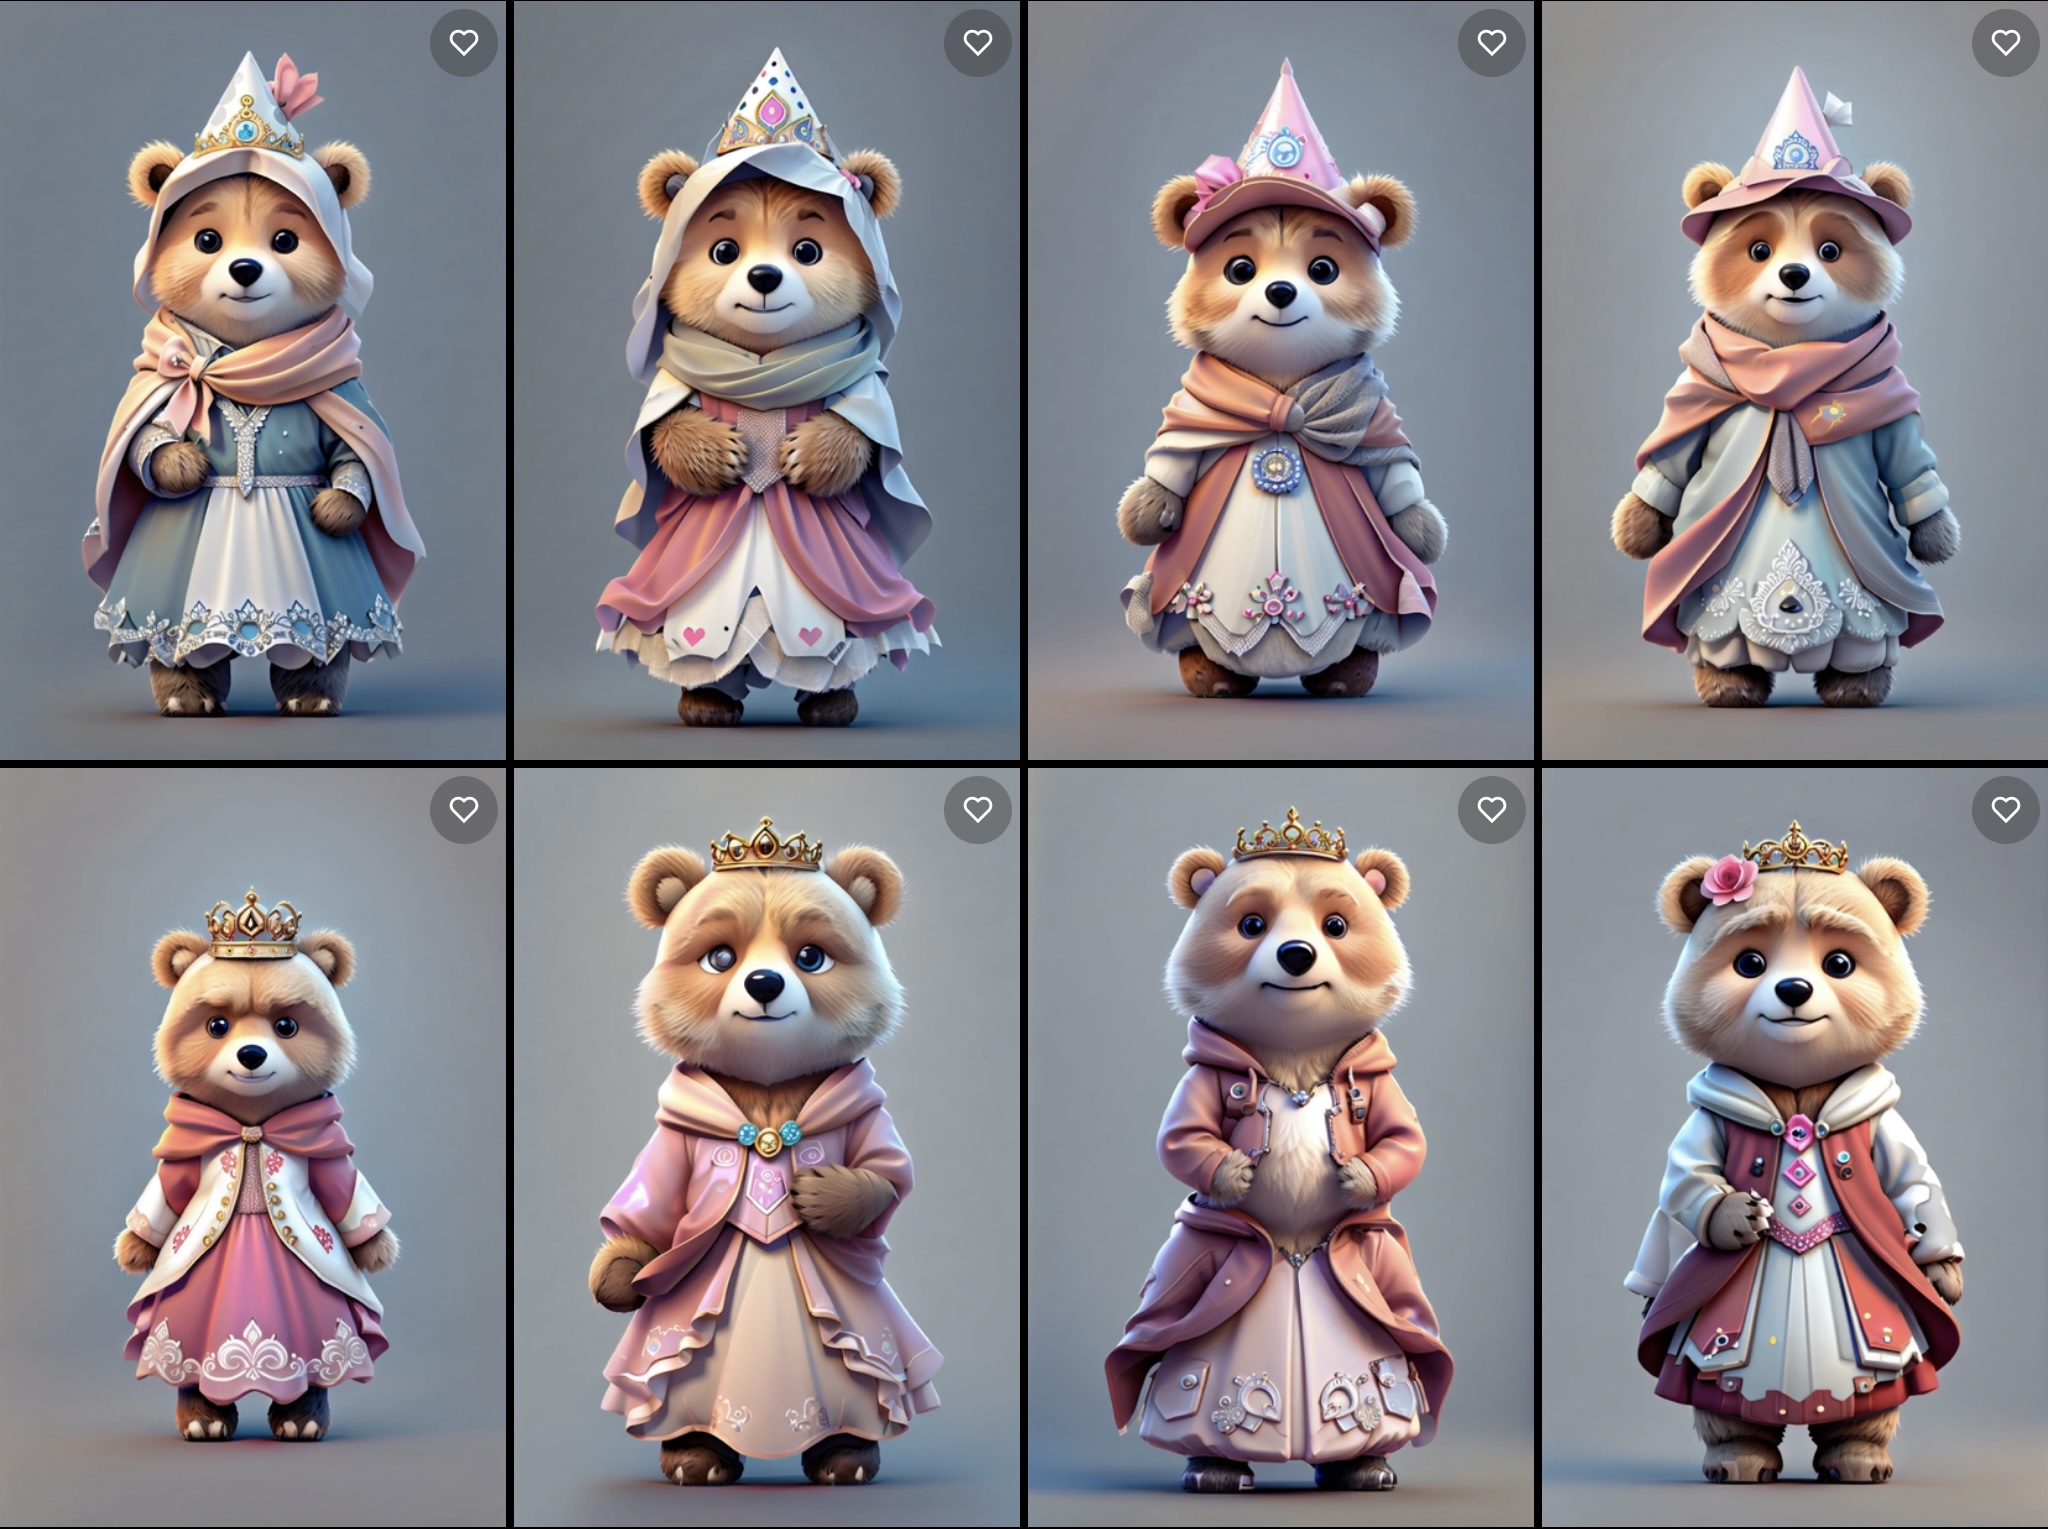 AI generated images of a bear character in a princess costume